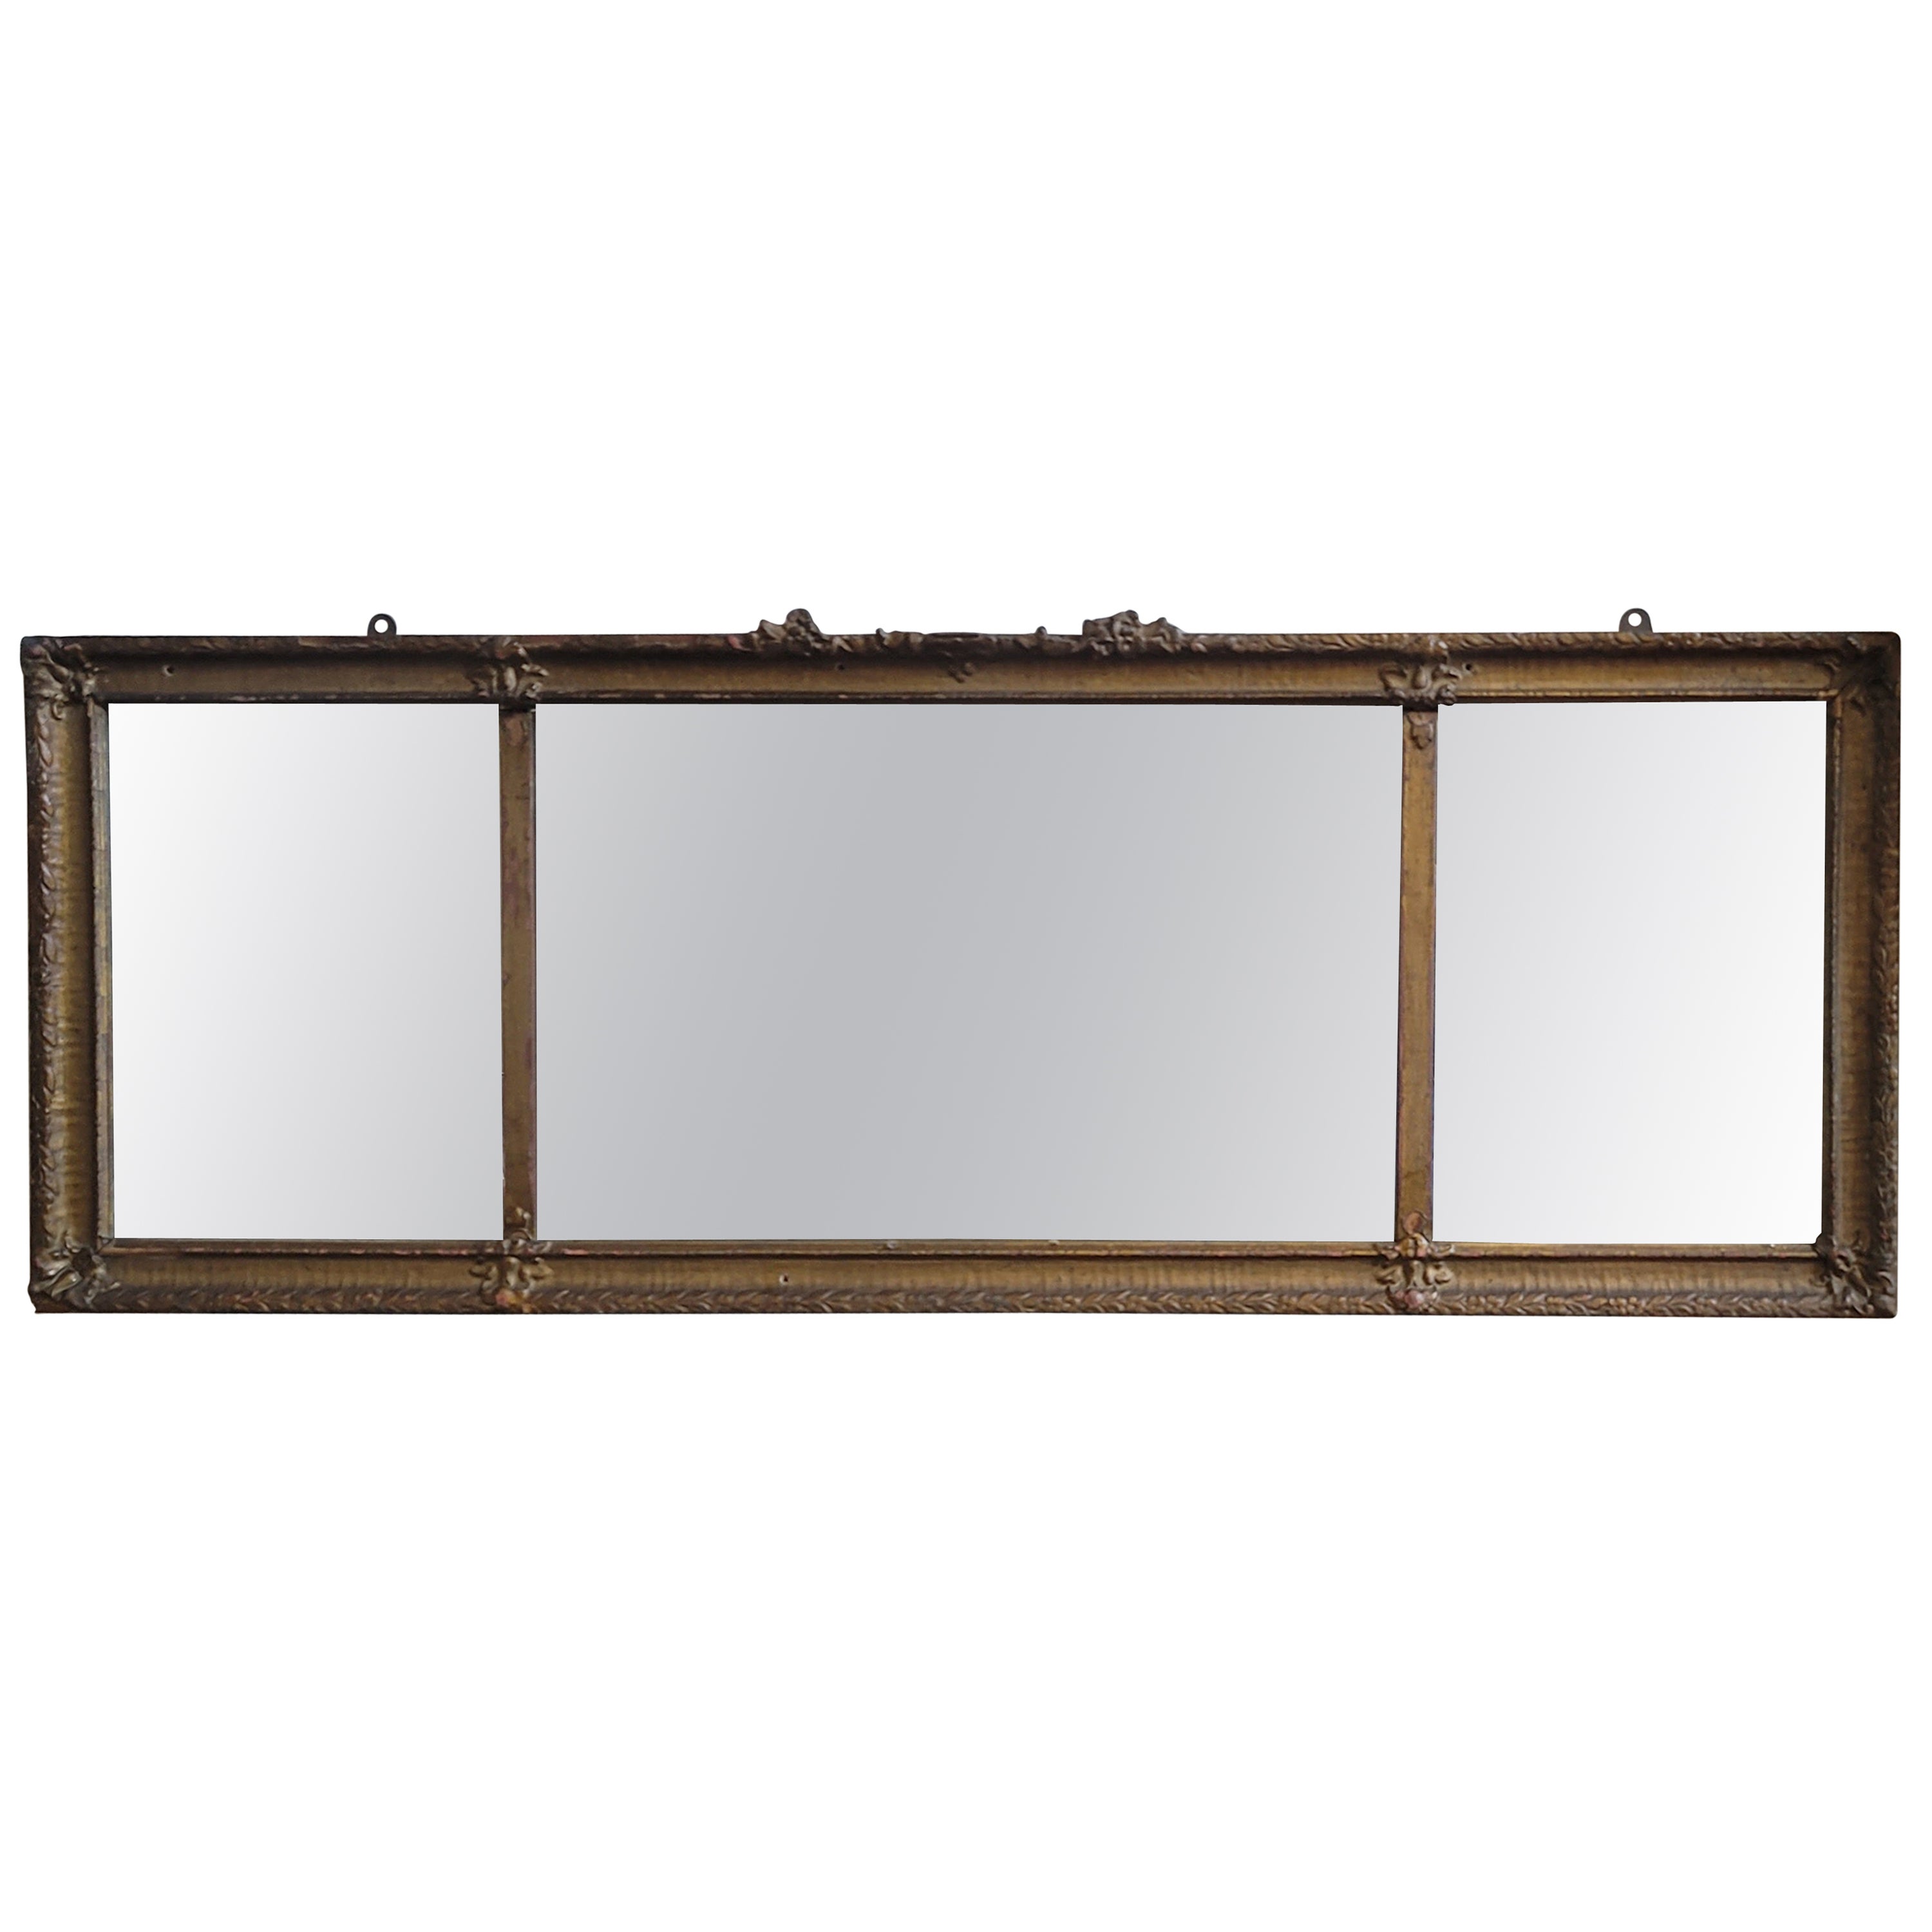 19th Century Trisection Ornate Giltwood Overmantel Fireplace Mirror, Circa 1880s